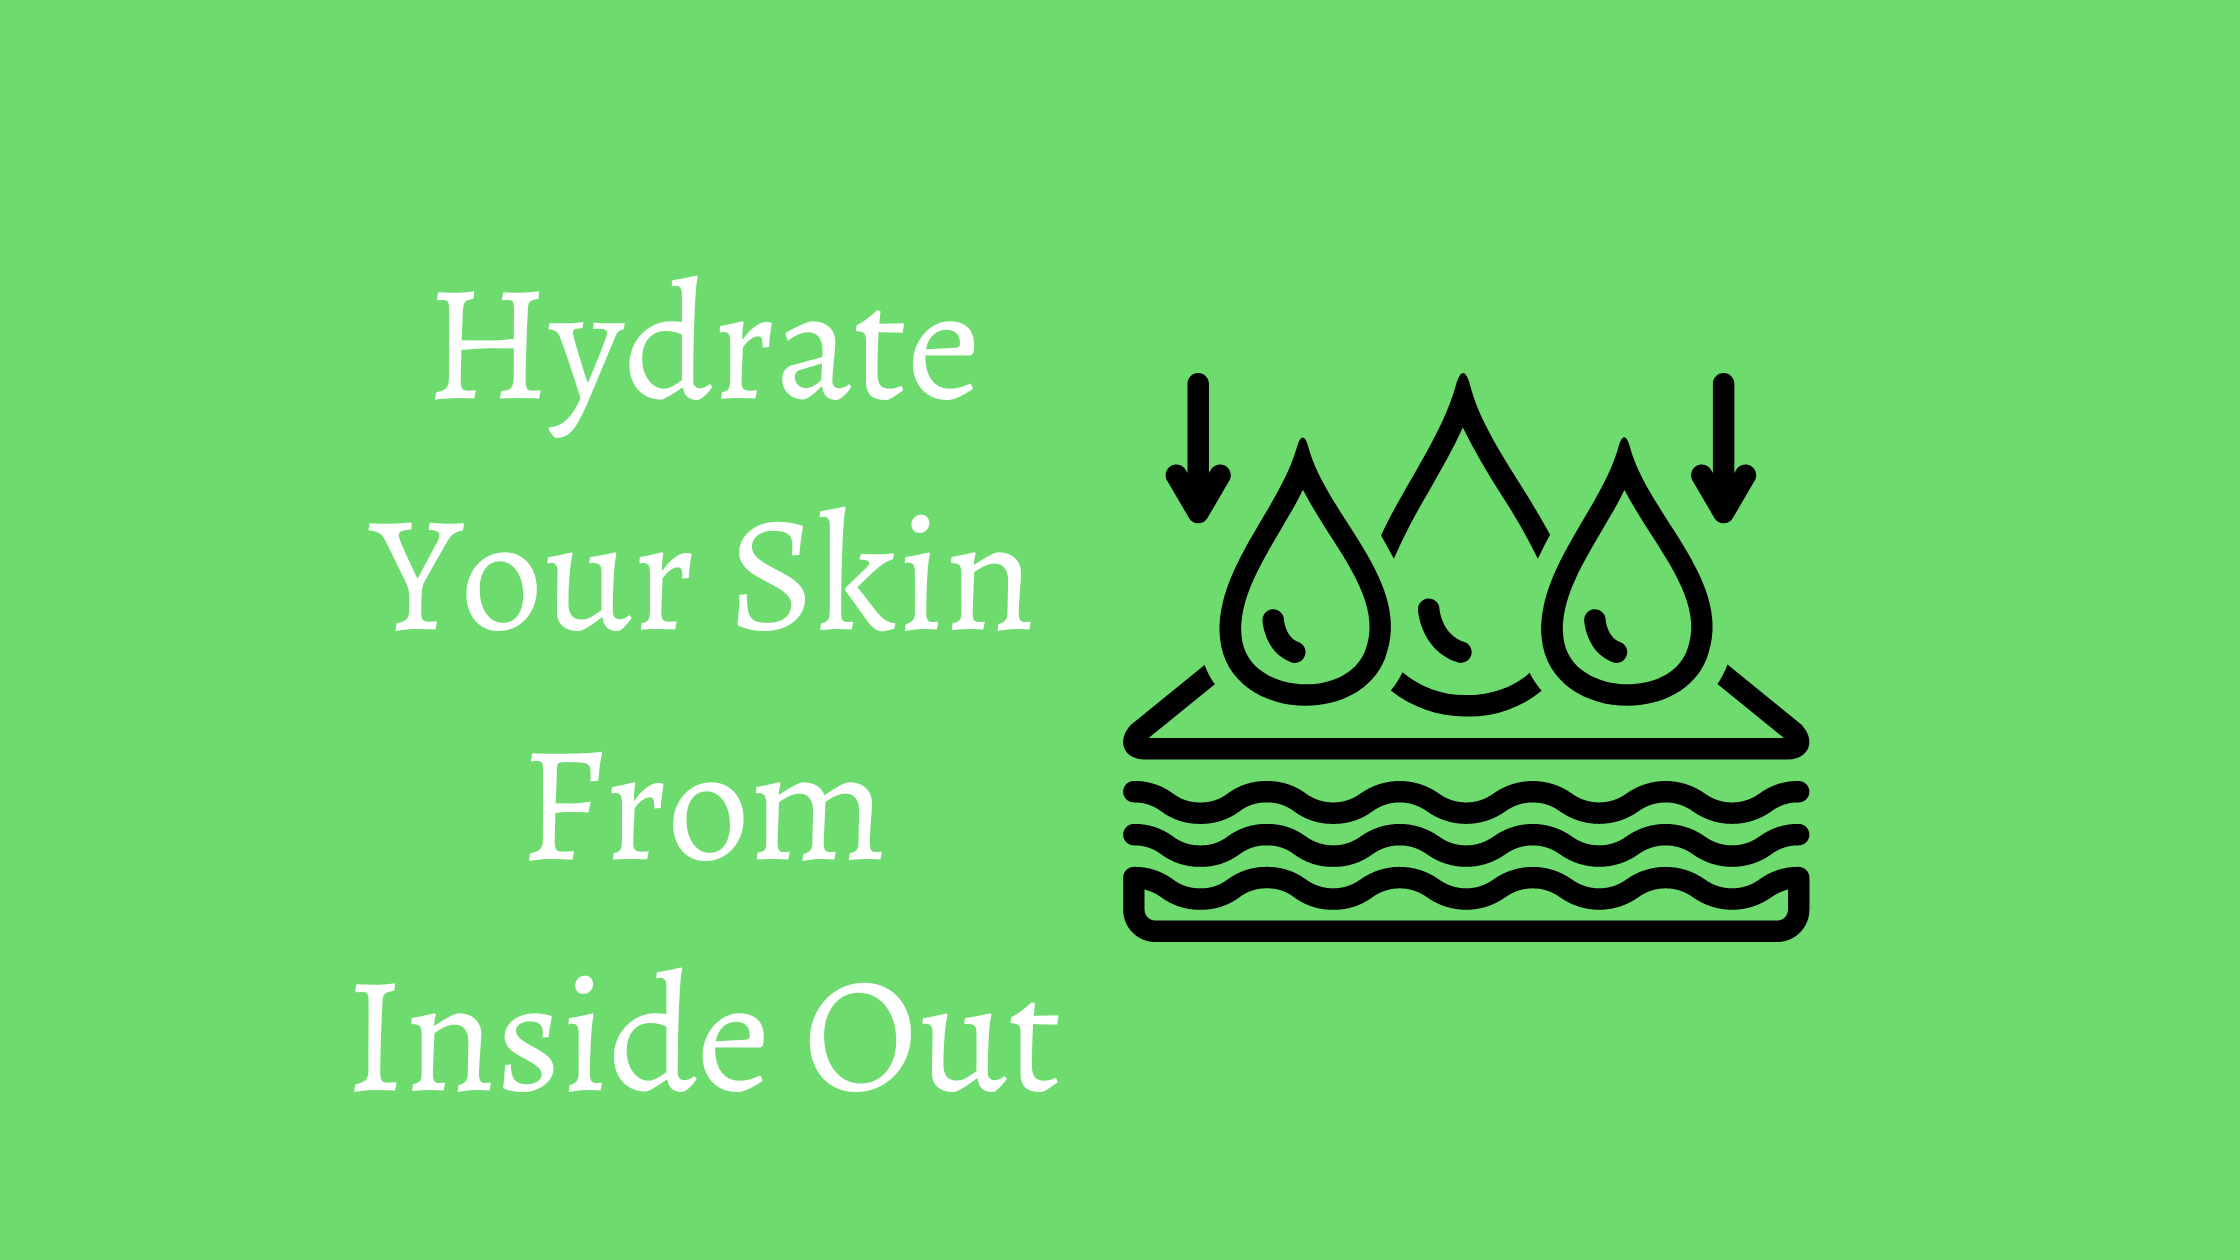 Hydrate Your Skin From Inside Out